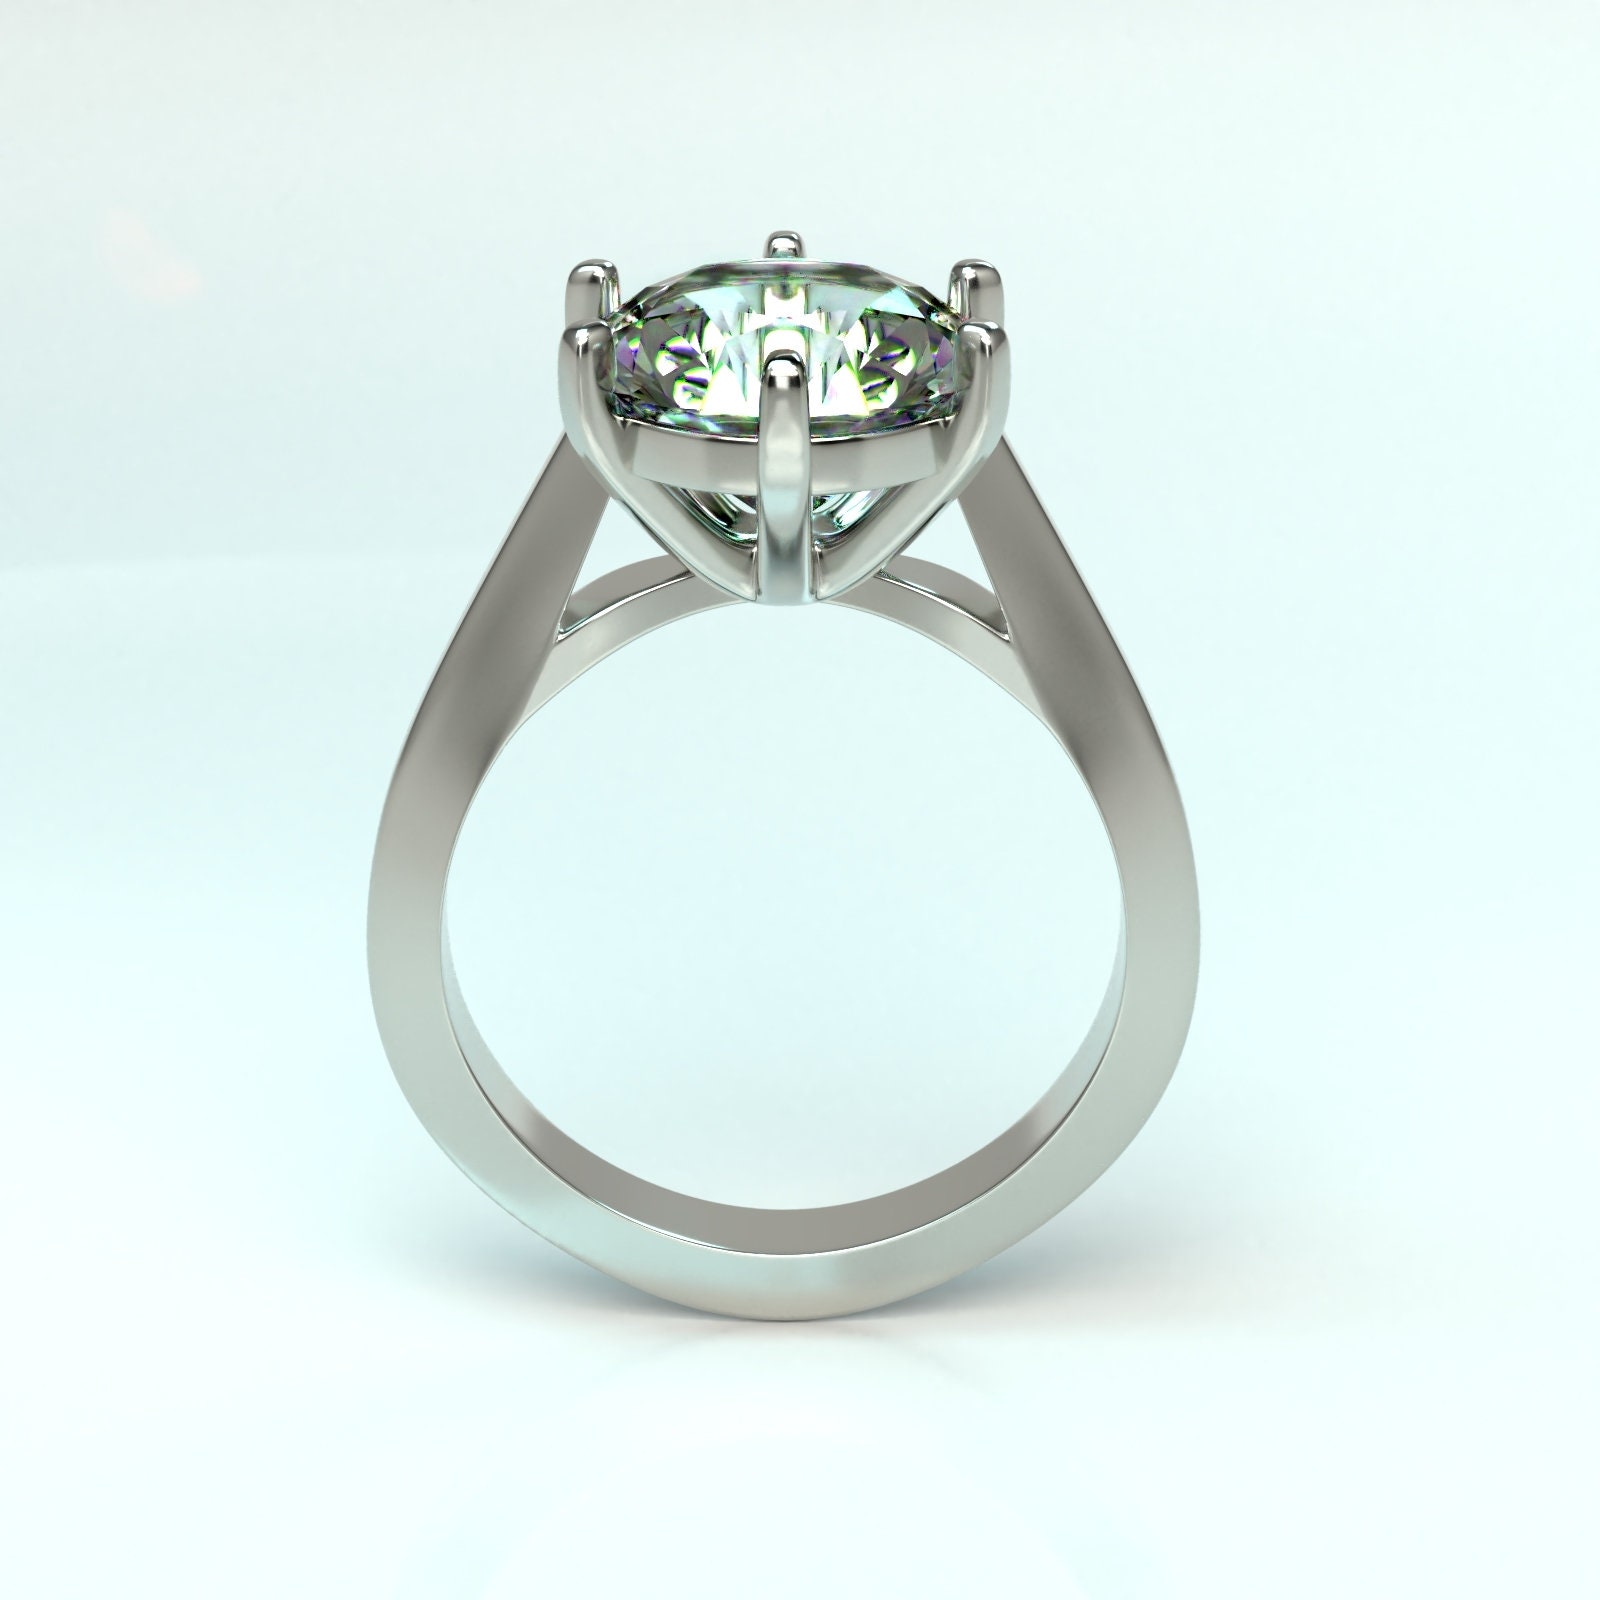 CC3-Engagement Ring With Separated Parts- Printed (EZJDJPP4B) by  jewelry3dmodels